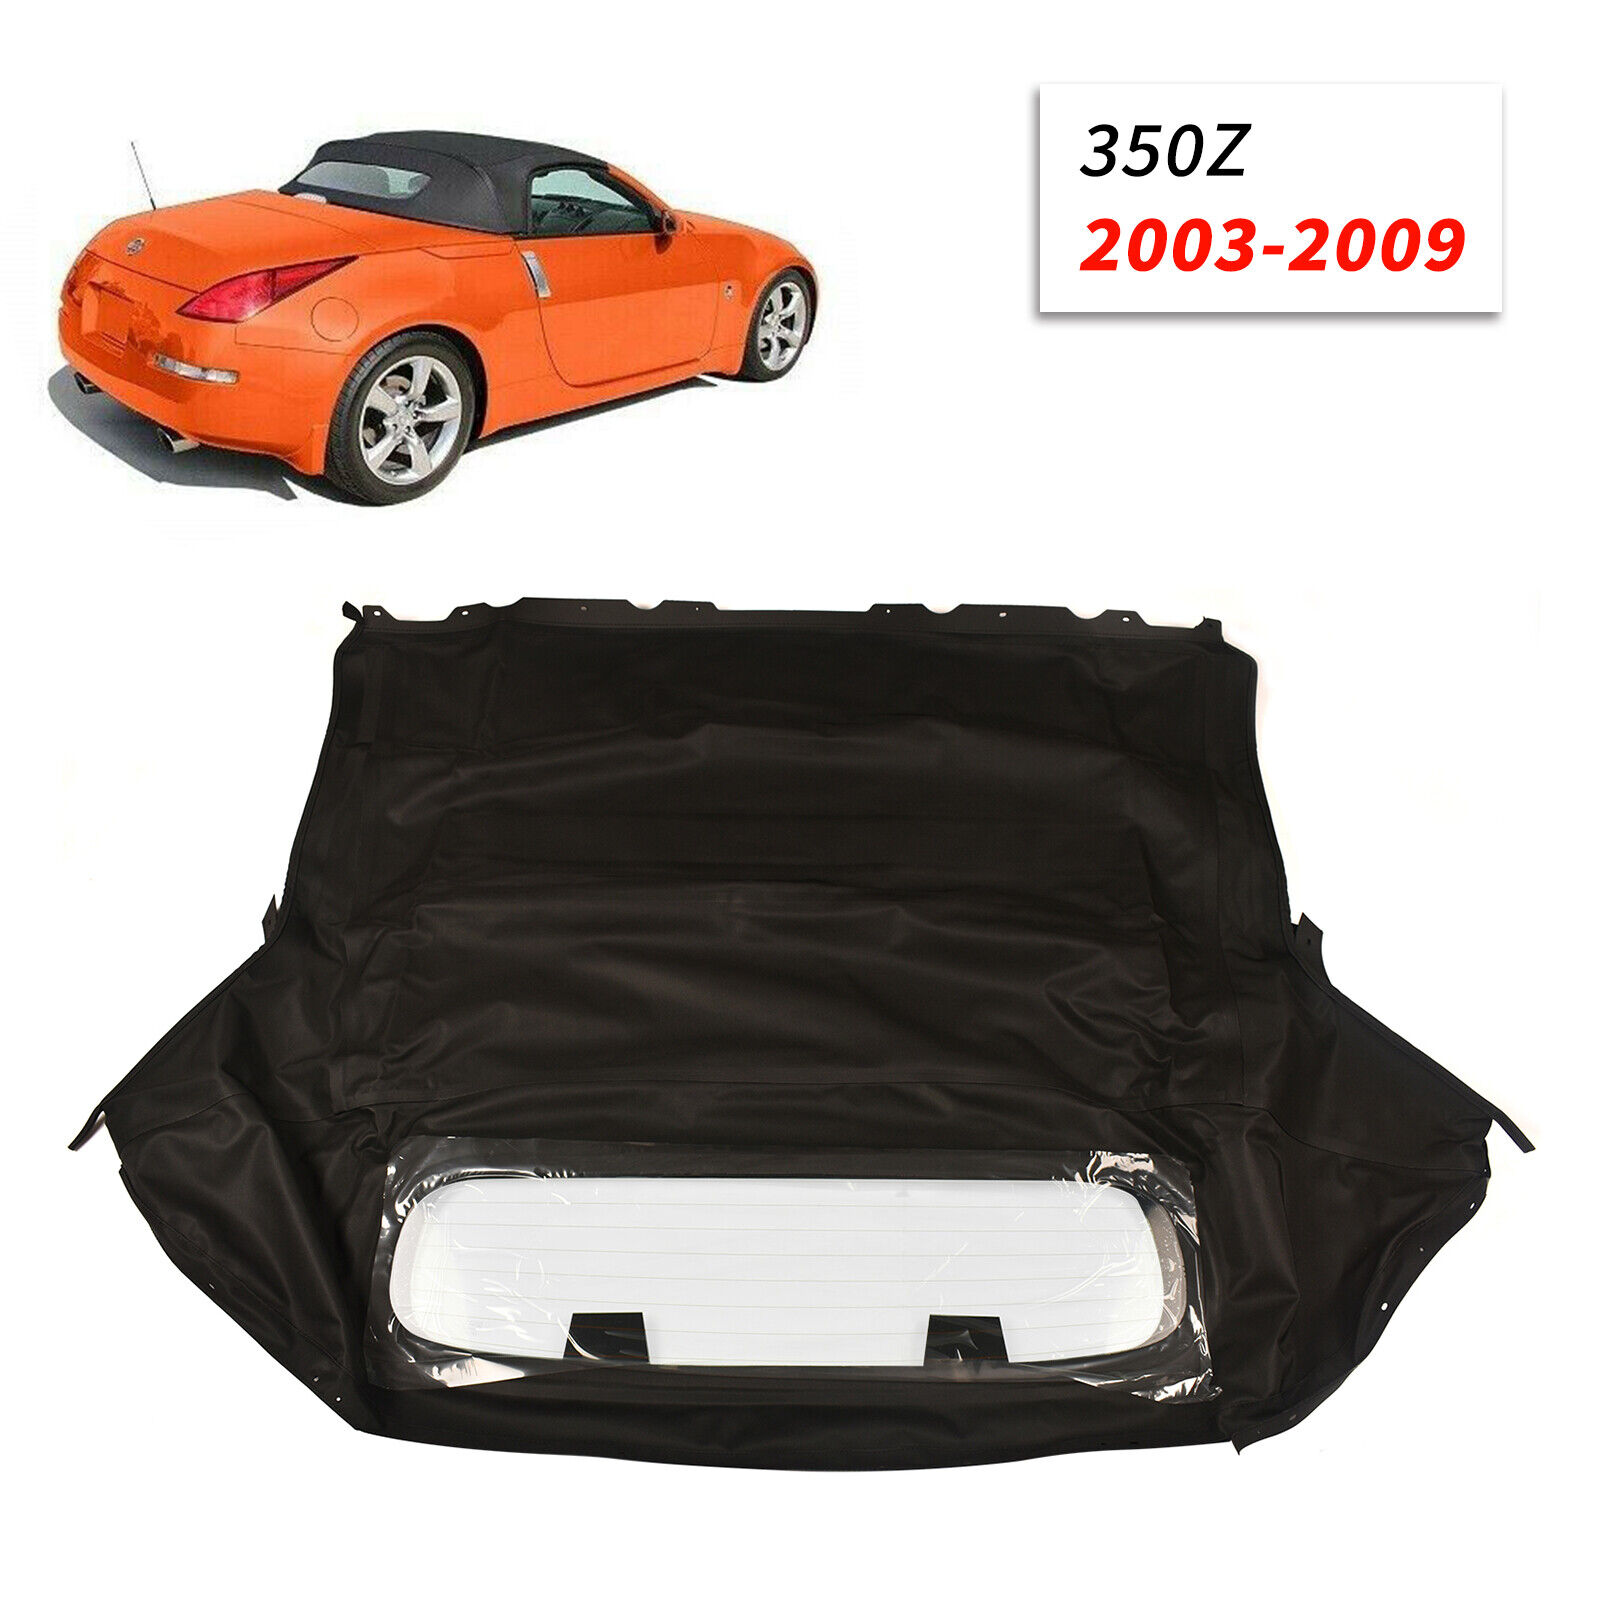 For Nissan 350Z Convertible Soft Top w/ Heated Glass Window Black N4300002